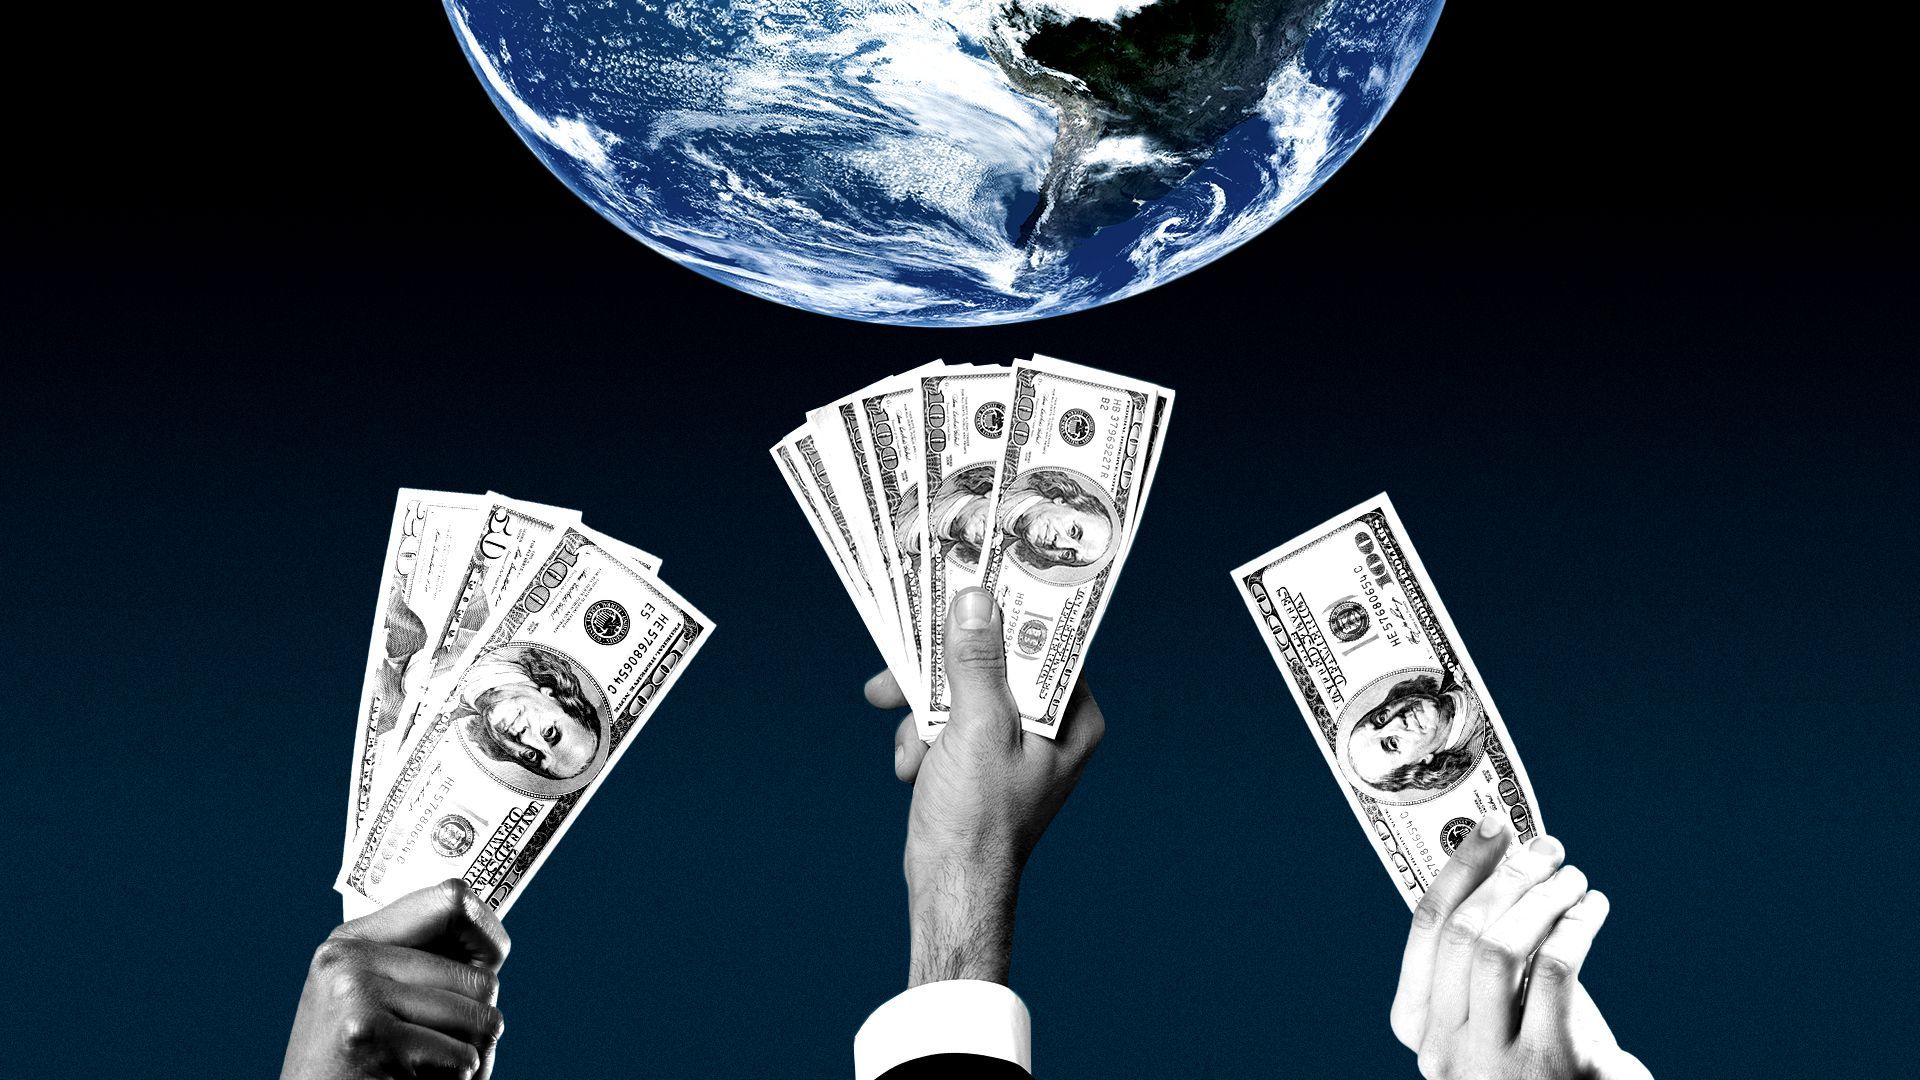 Illustration of hands holding money up towards Earth